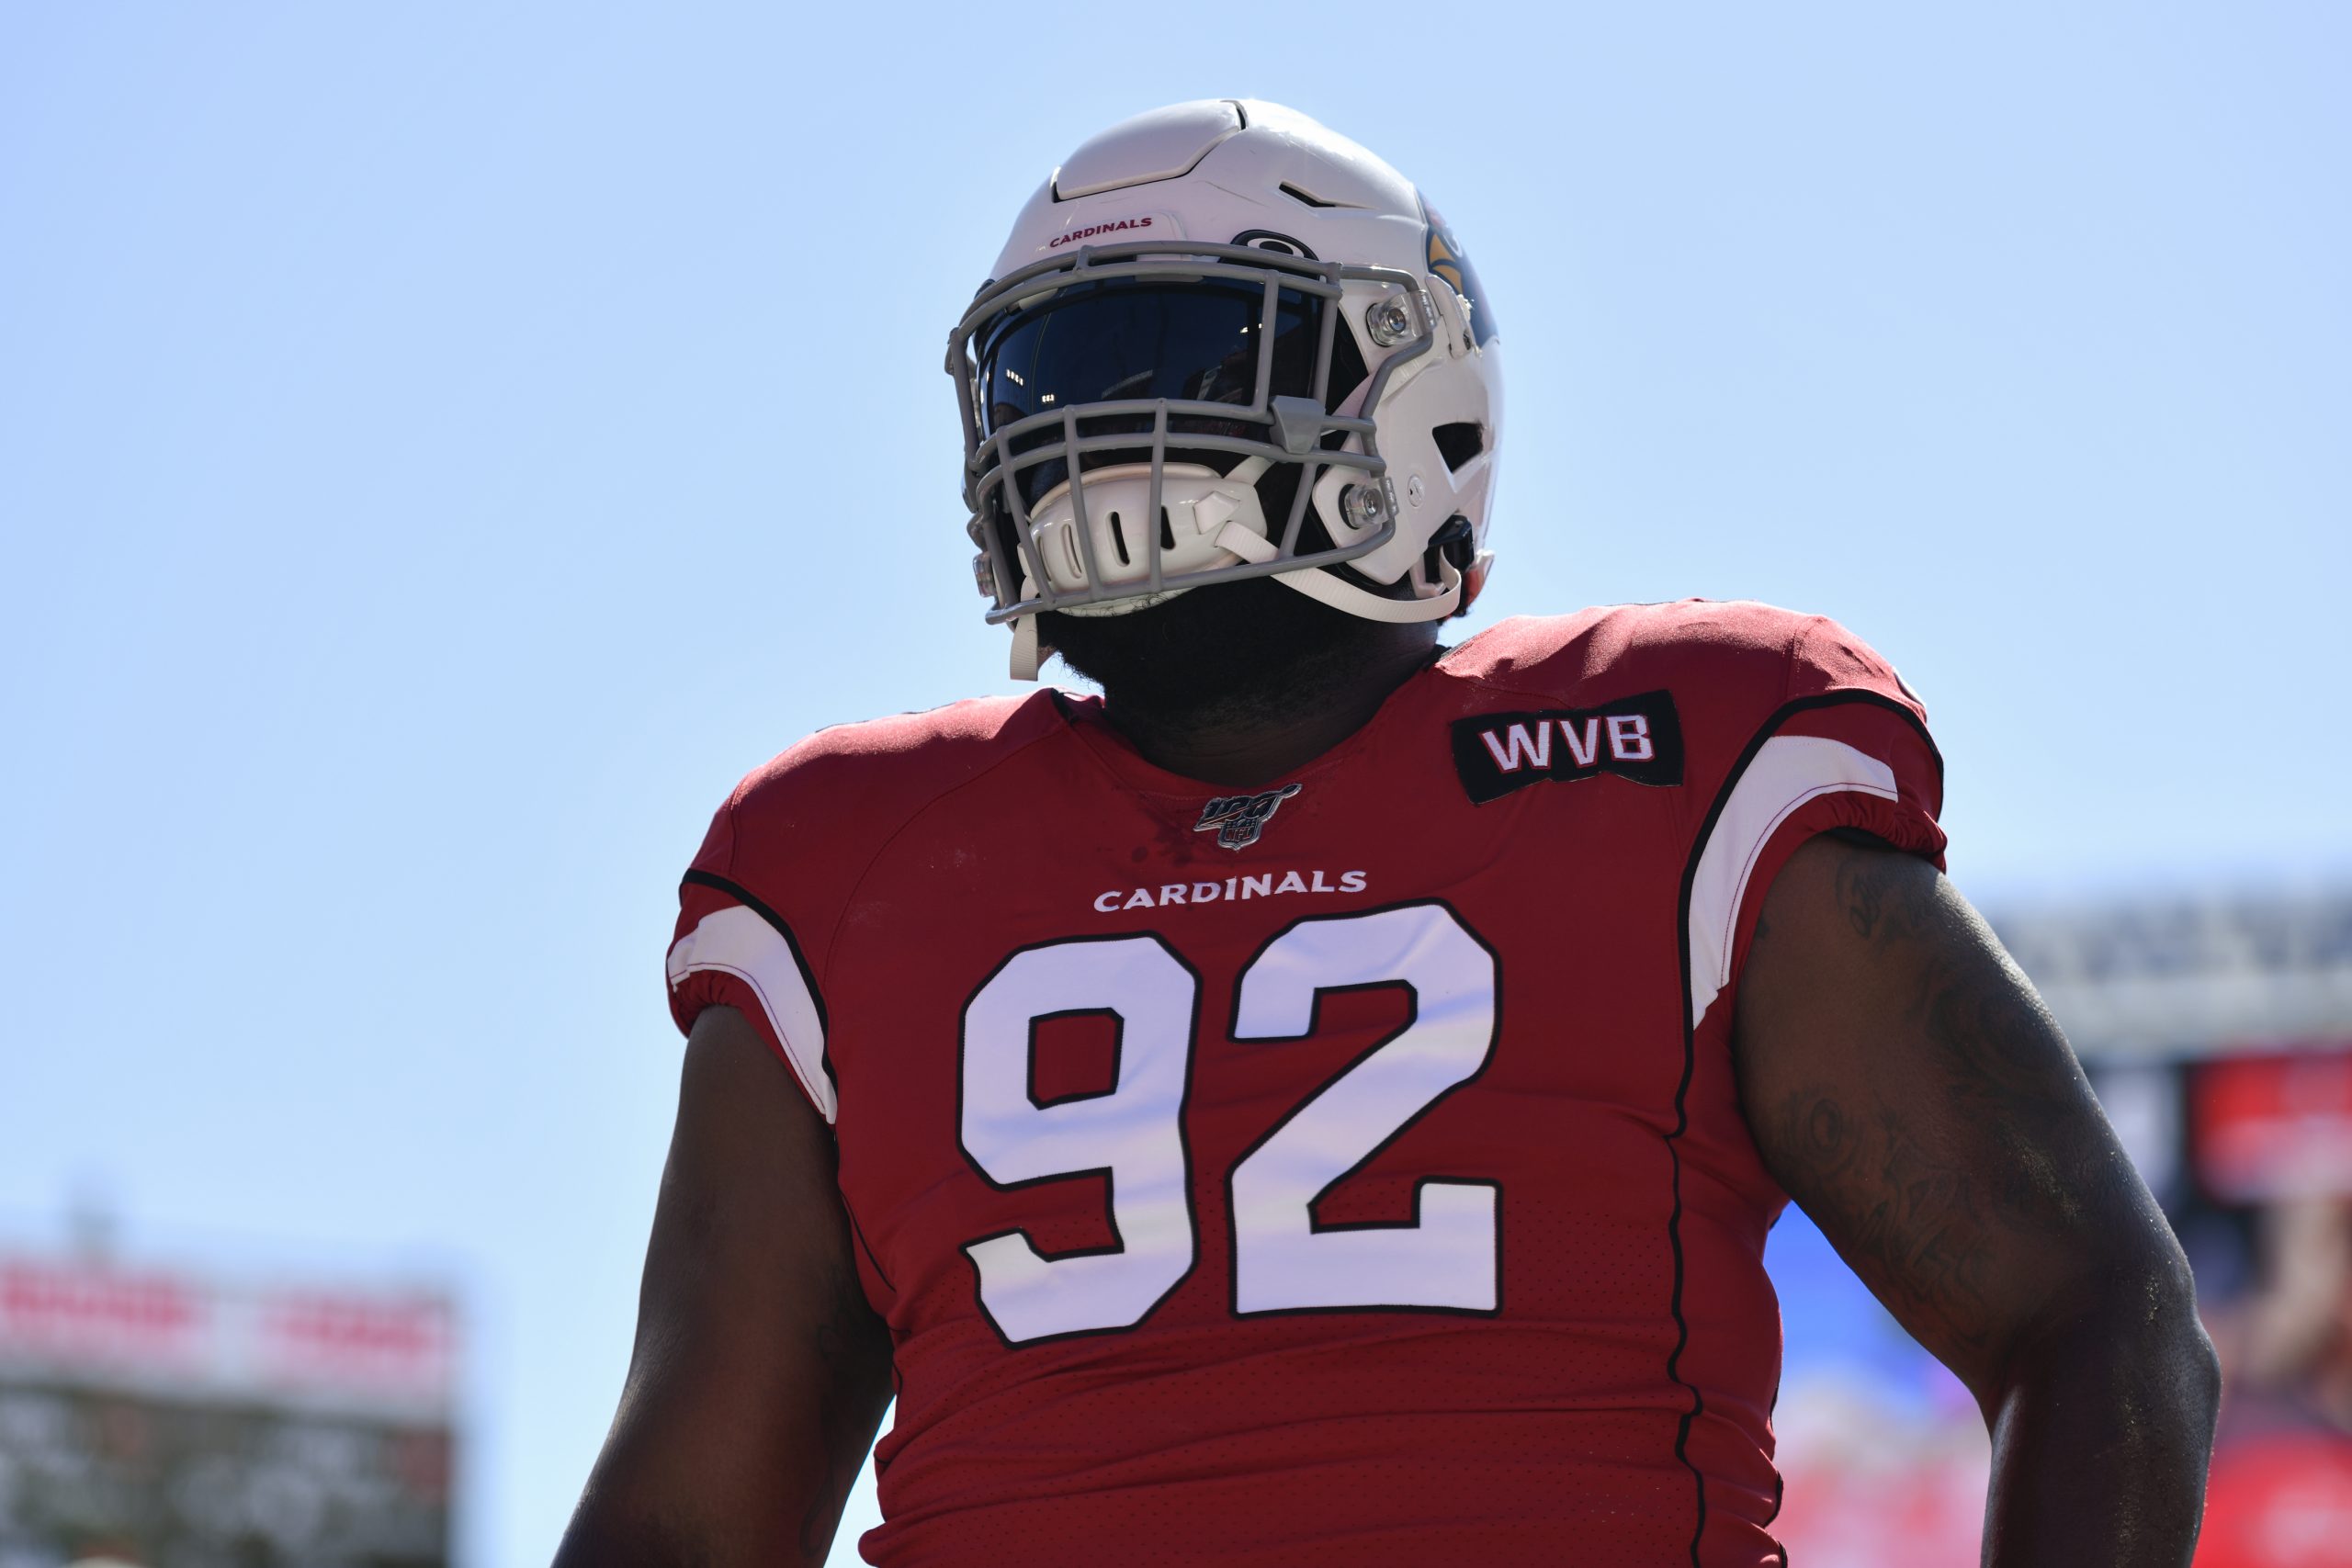 TAMPA, FL - NOVEMBER 10: Arizona Cardinals Nose Tackle Zach Kerr (92) prior to the first half of an NFL, American Footba